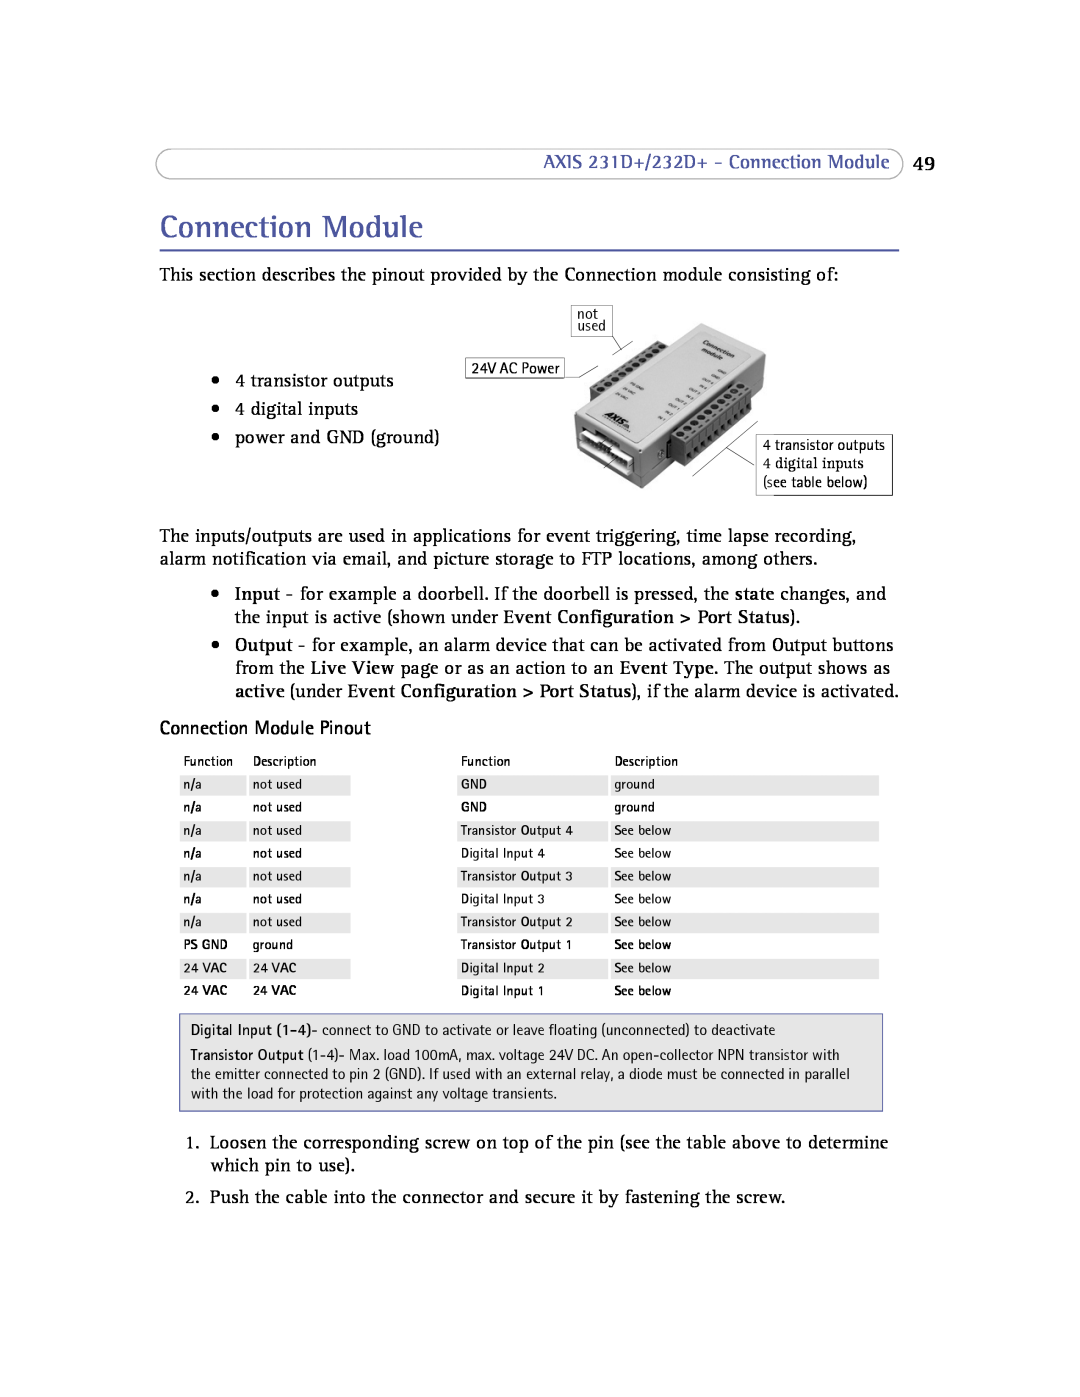 Axis Communications 232d+ user manual AXIS 231D+/232D+ - Connection Module, Connection Module Pinout 